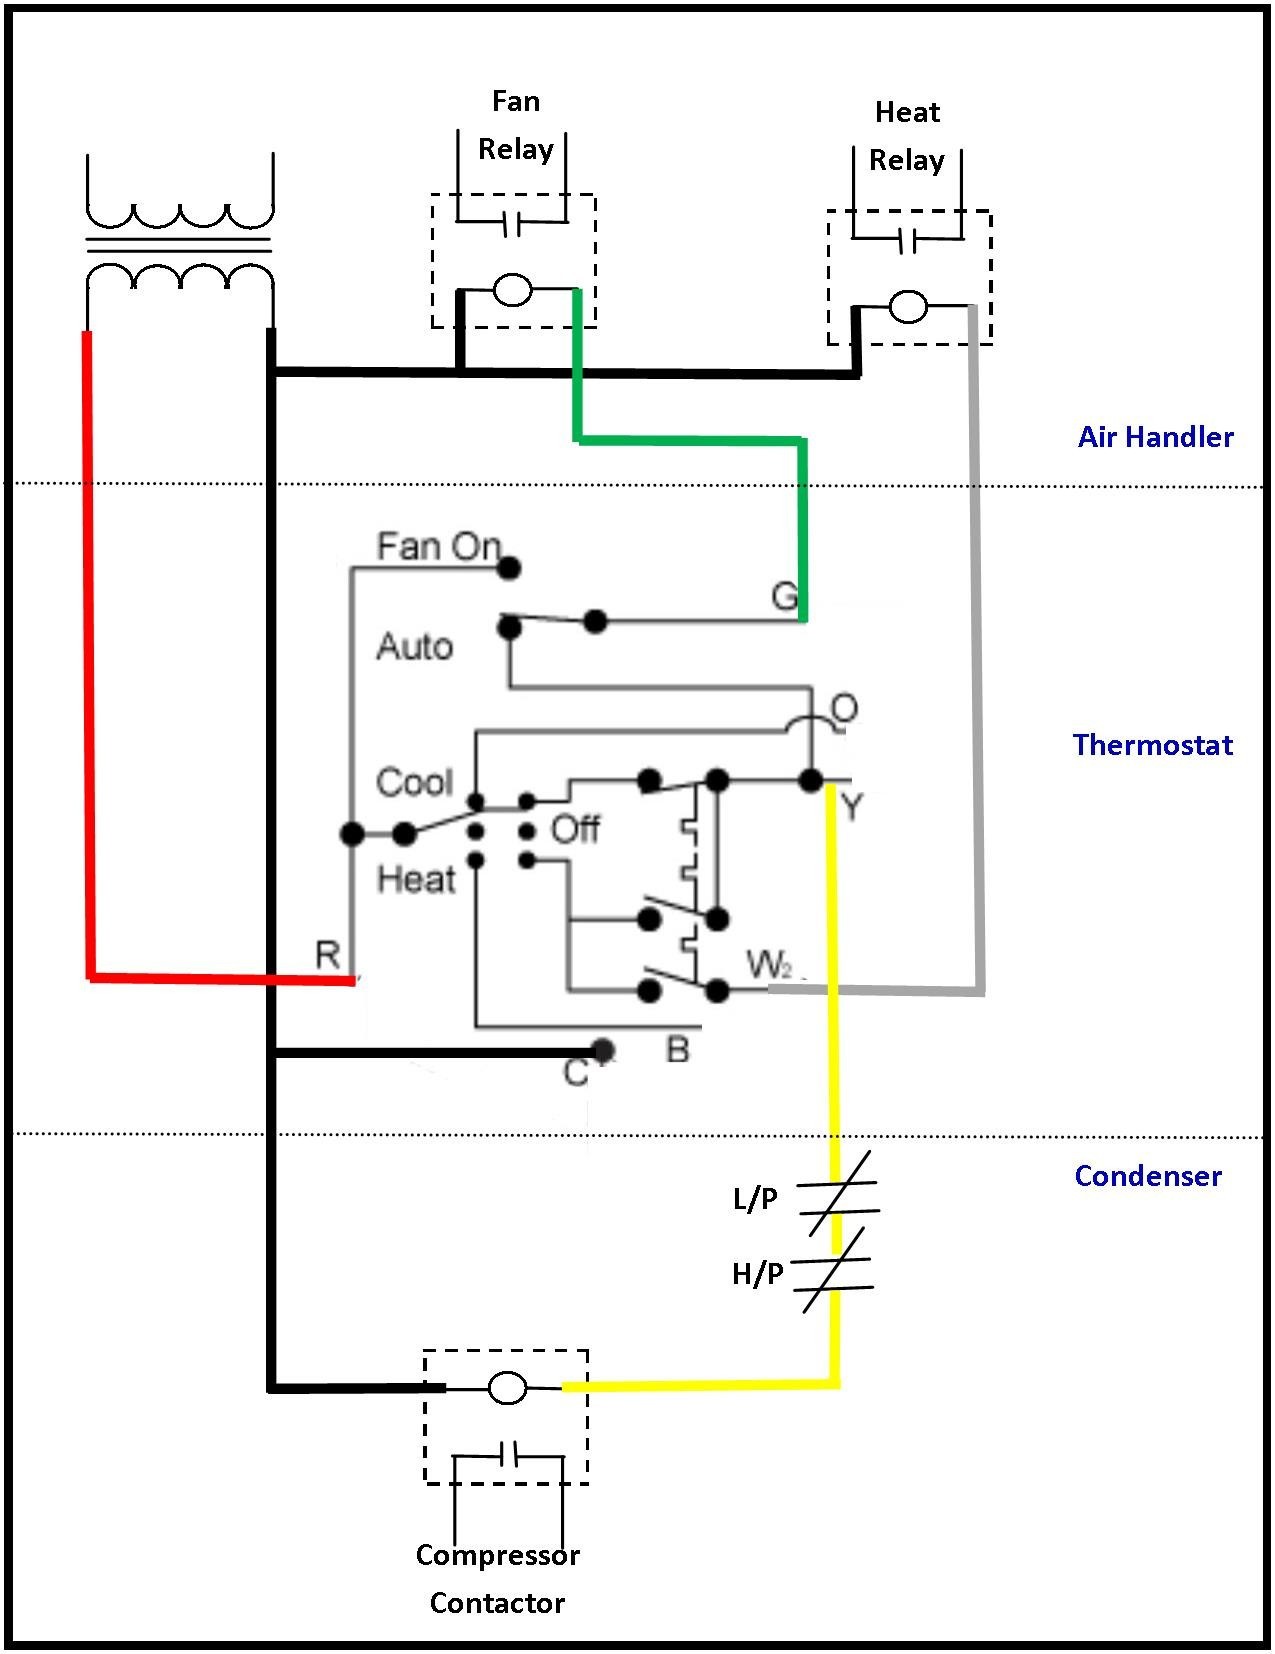 Home Hvac Wiring Diagram New Room thermostat Wiring Diagrams for Hvac Systems with Home Ac